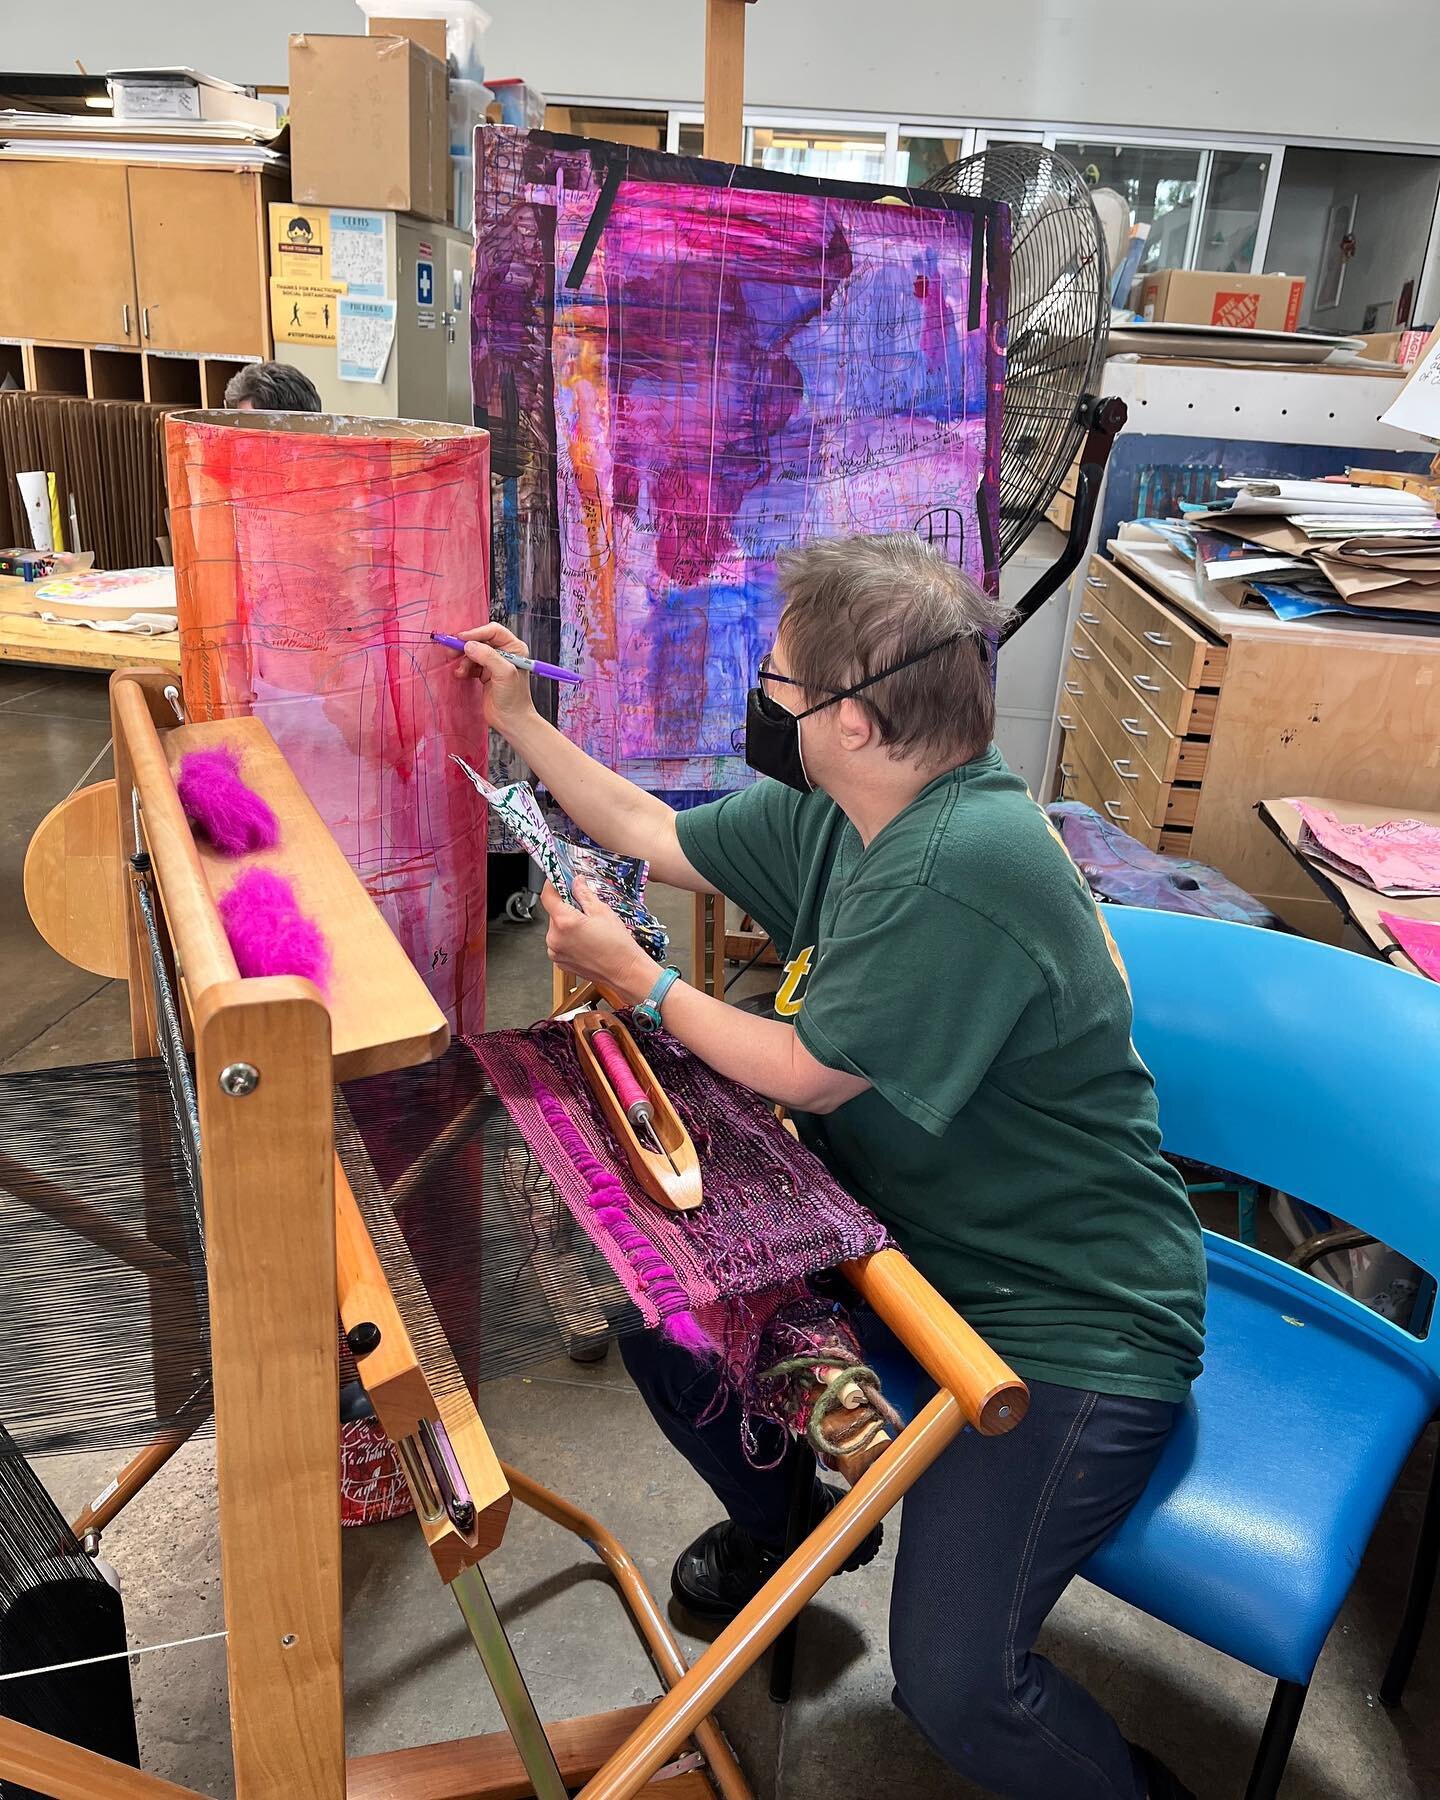 #NicoleStorm sets up the ultimate multitasking workspace!

Storm&rsquo;s work is currently featured in &ldquo;Creative! Growth!&rdquo; on view at @jmkac through May 19, 2023.

Image 1: Nicole Storm sits at a loom while holding a sketch in one hand an